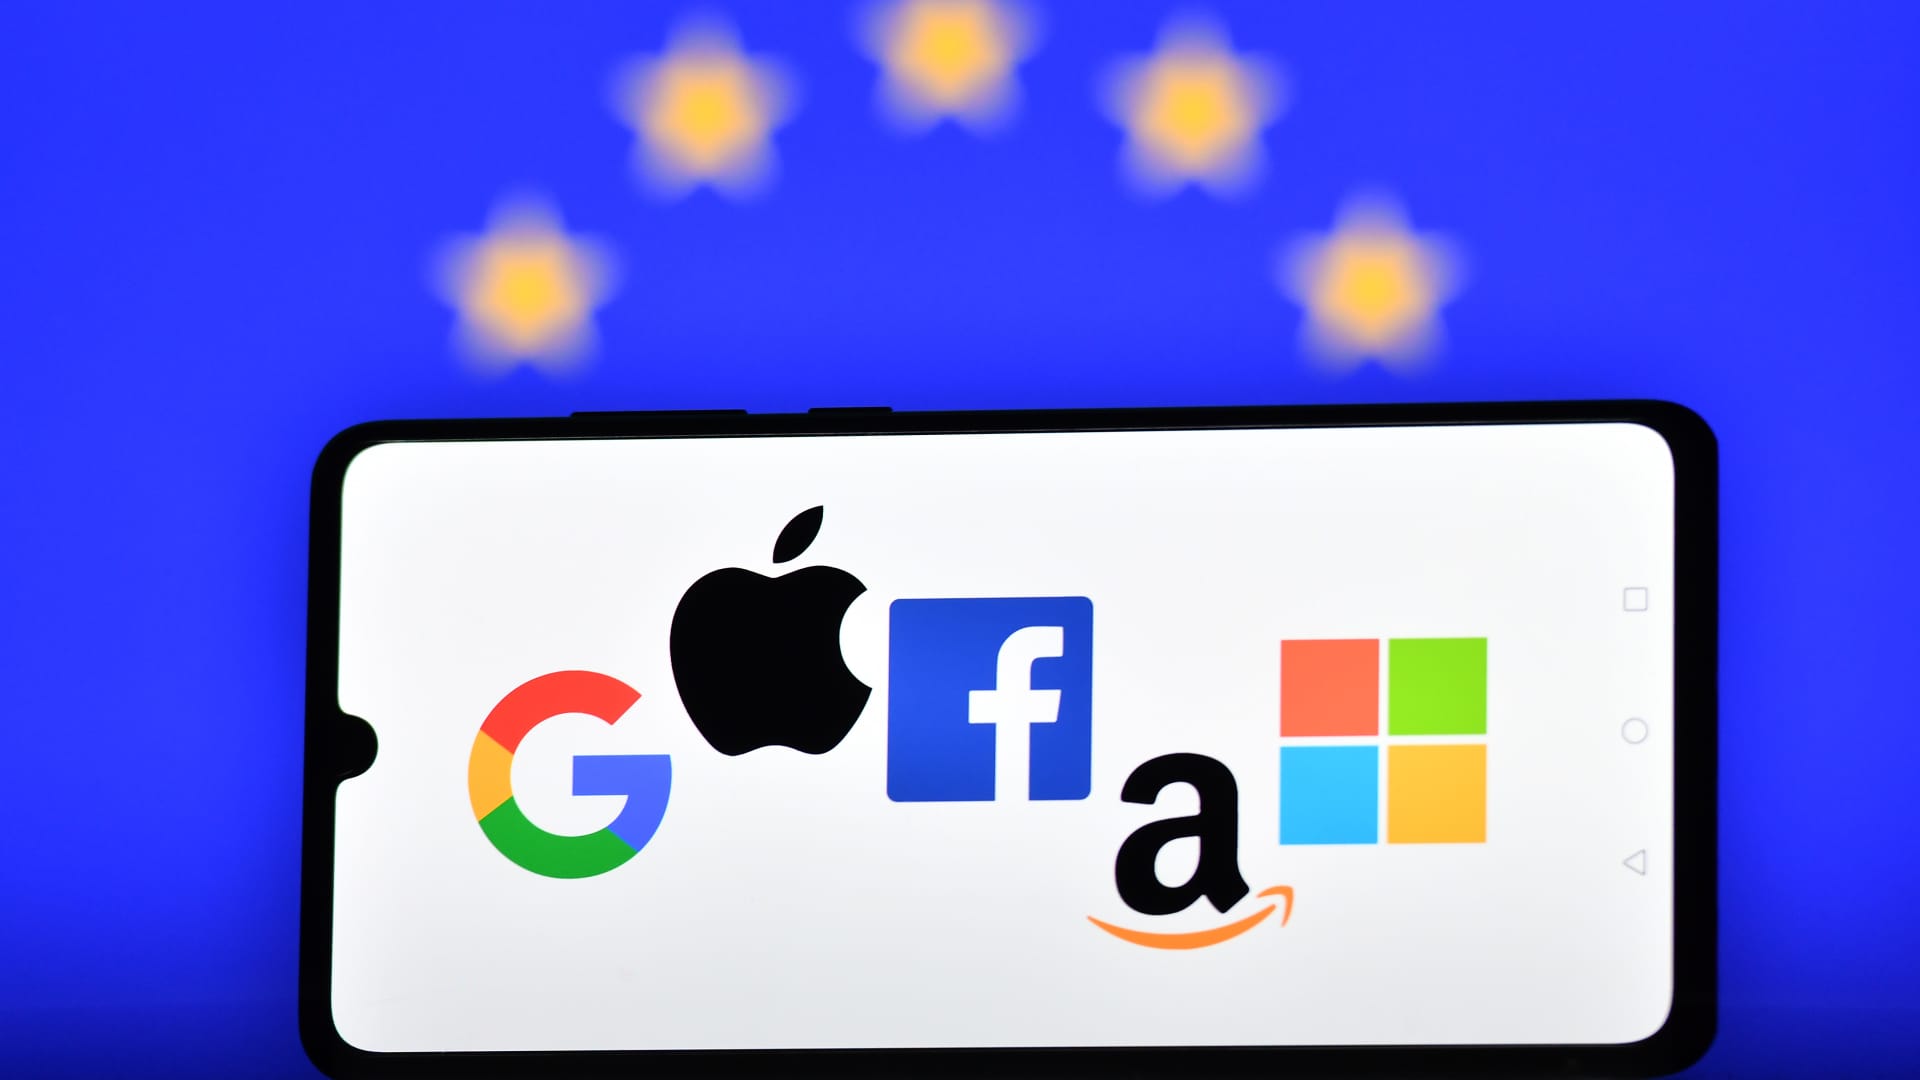 EU lists Alphabet, Amazon, Meta and three other tech giants as 'gatekeepers' under strict competition rules